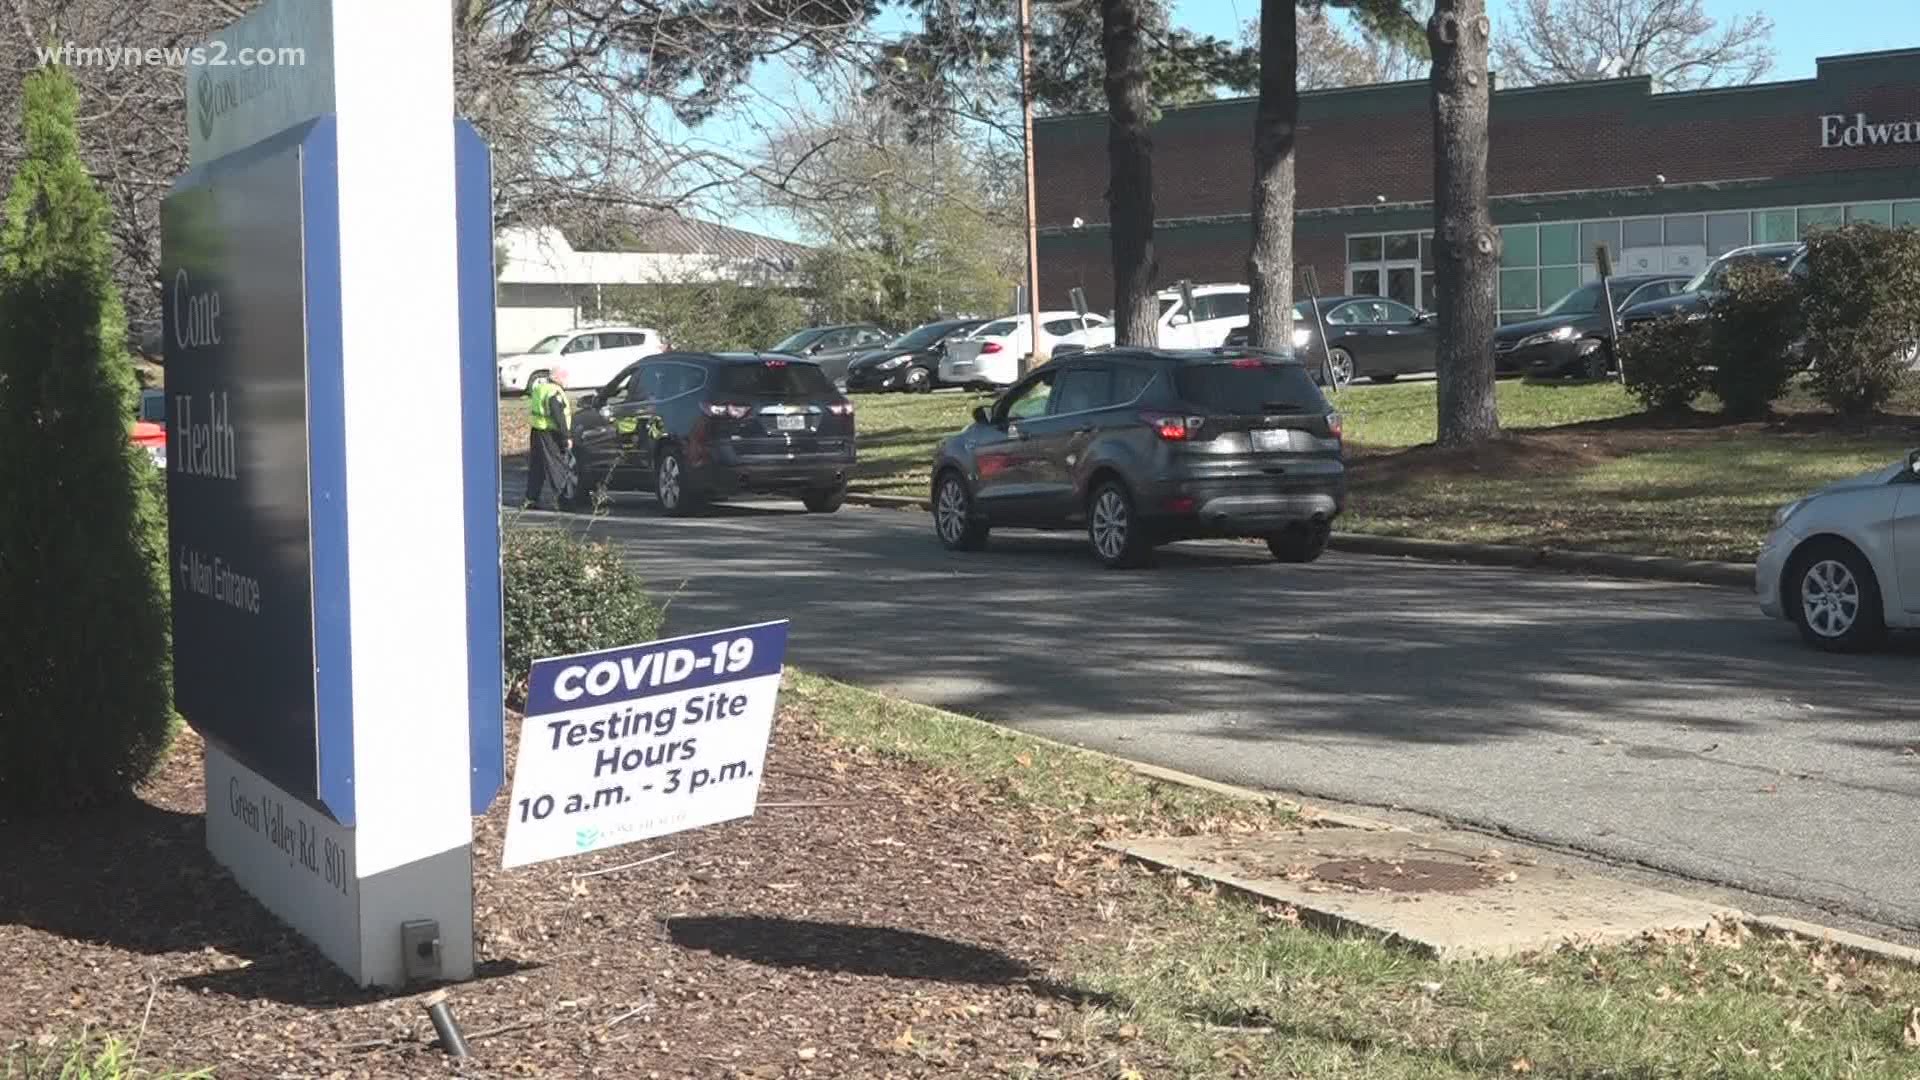 Local health officials say wait times for a coronavirus test can take up to two hours. Due to high demand, results could take longer to receive.